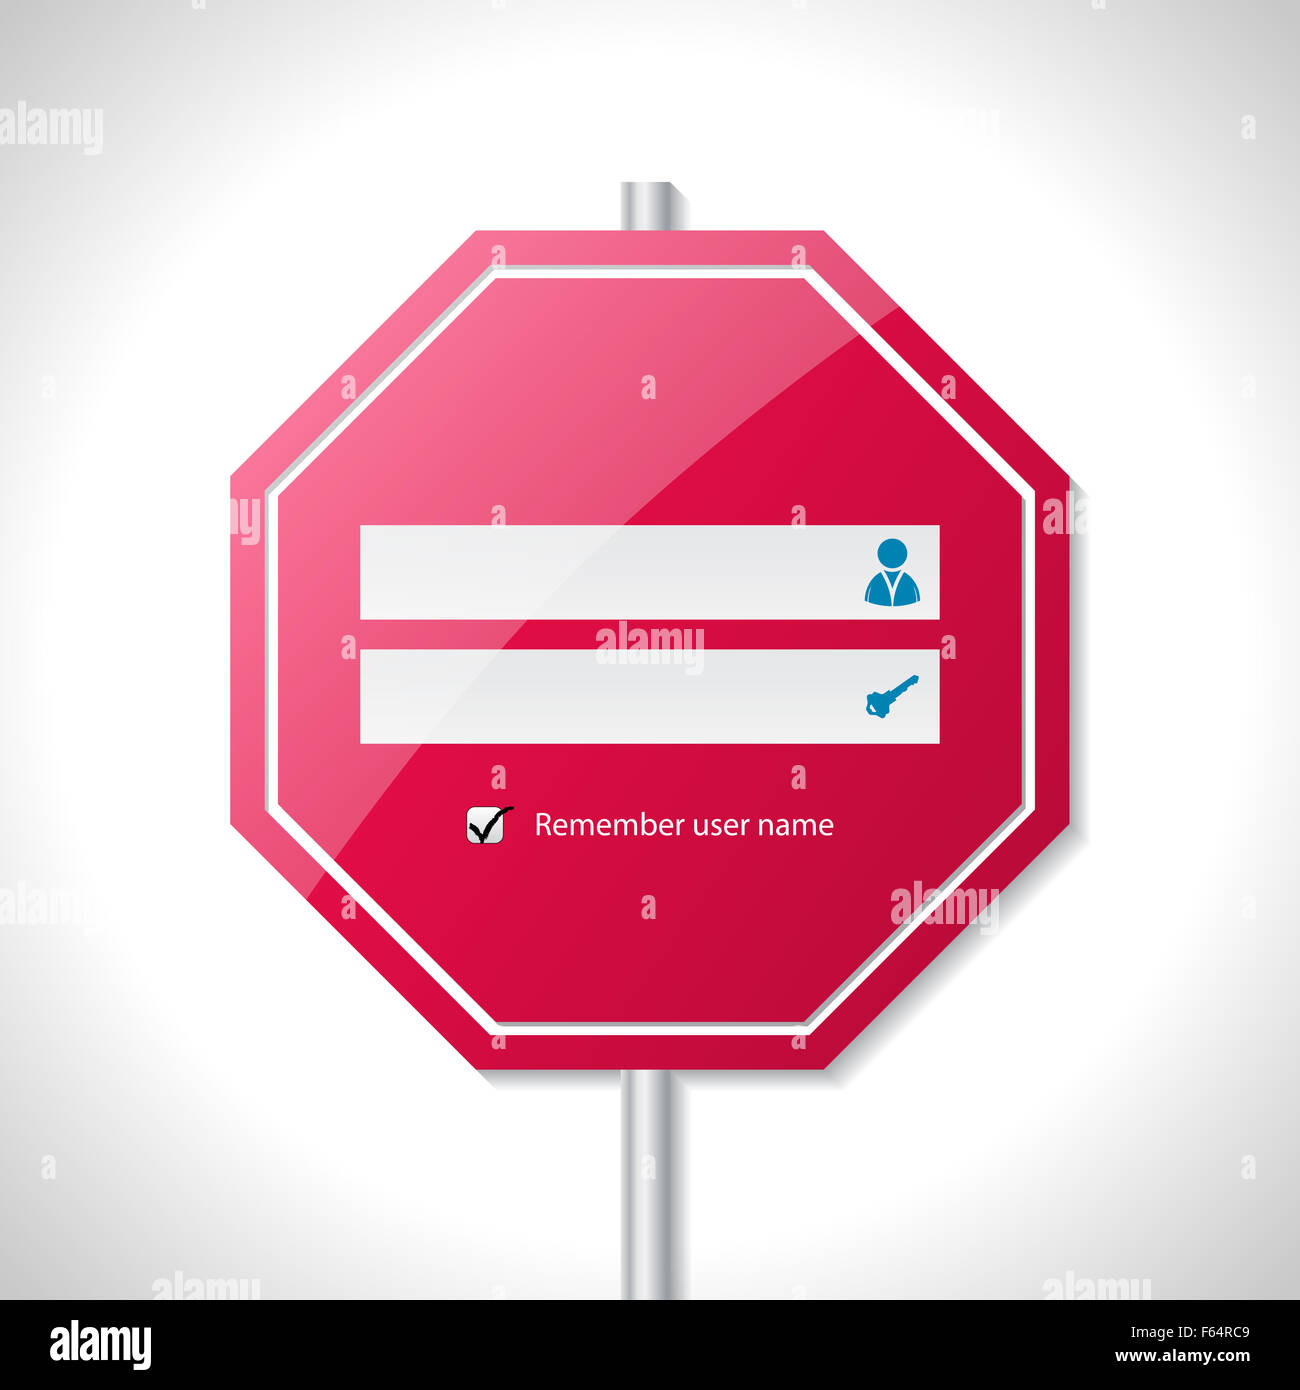 Stop sign inspired login screen template design Stock Photo